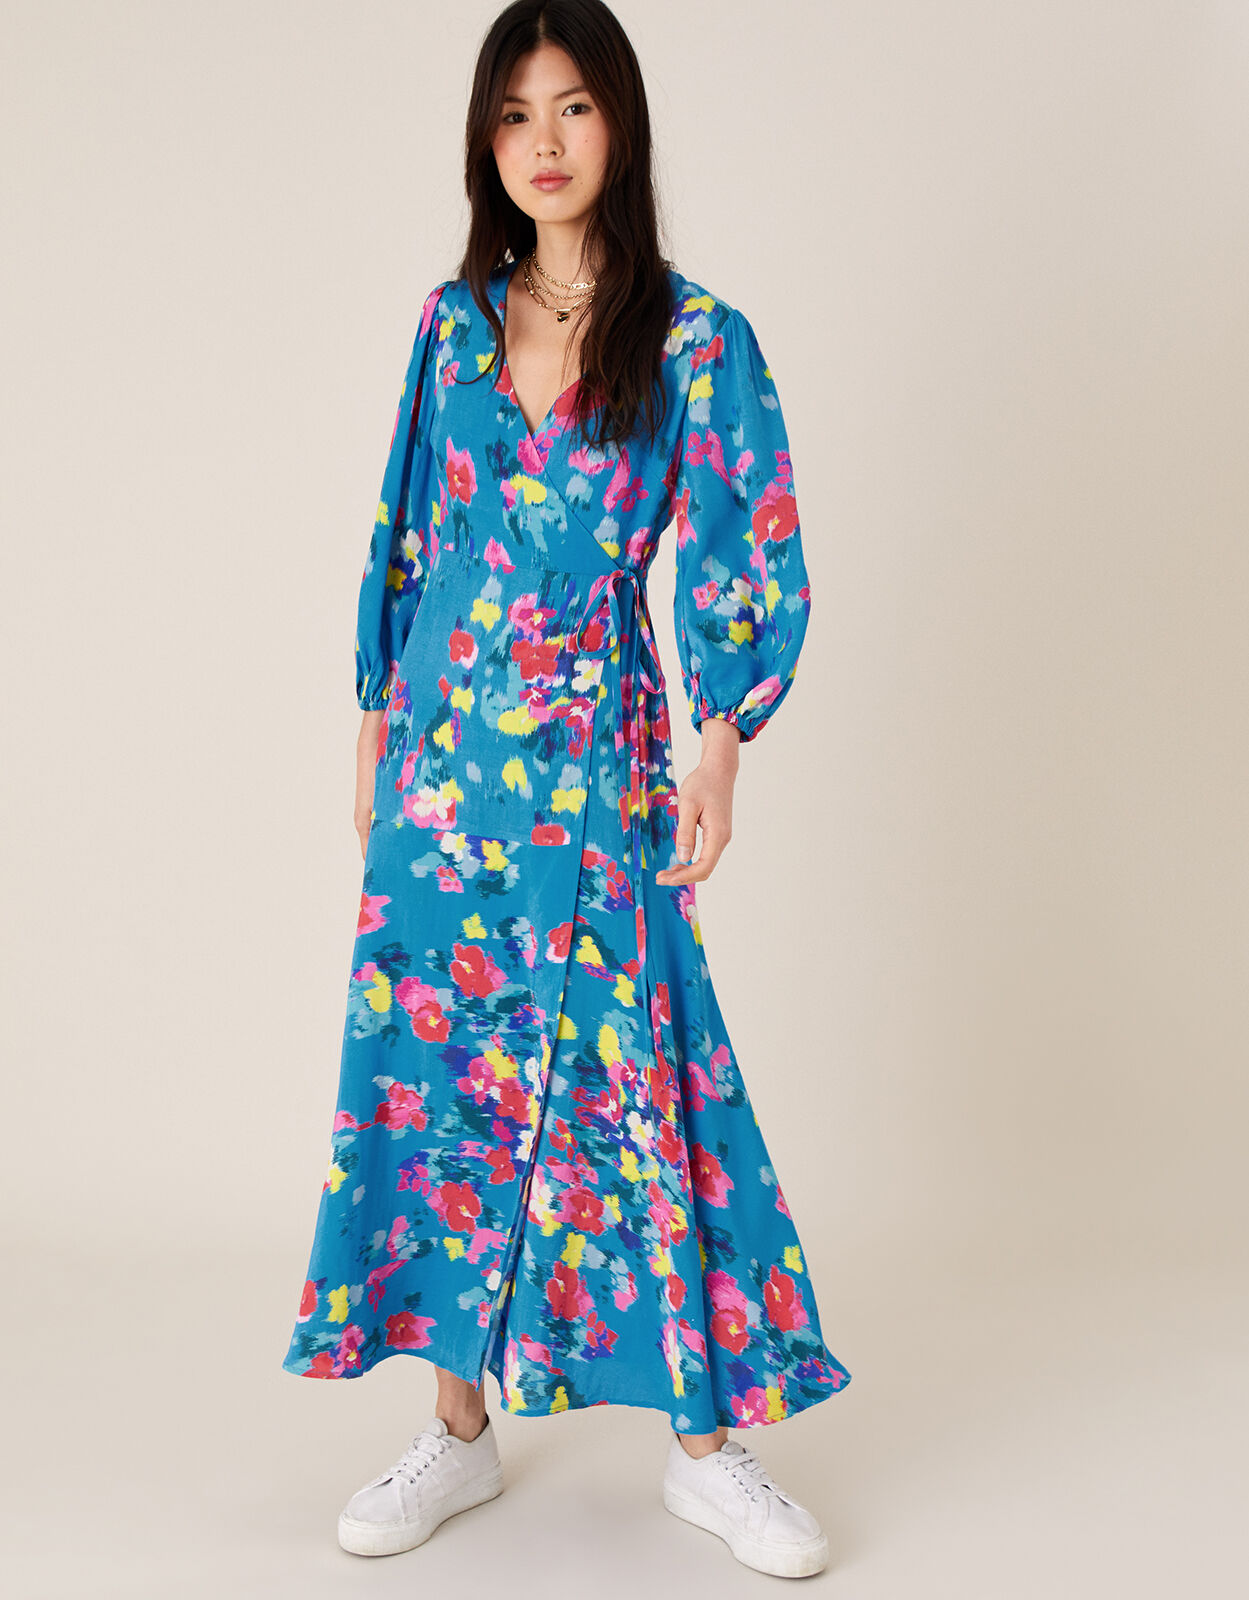 Ellie Floral Wrap Dress in Sustainable ...